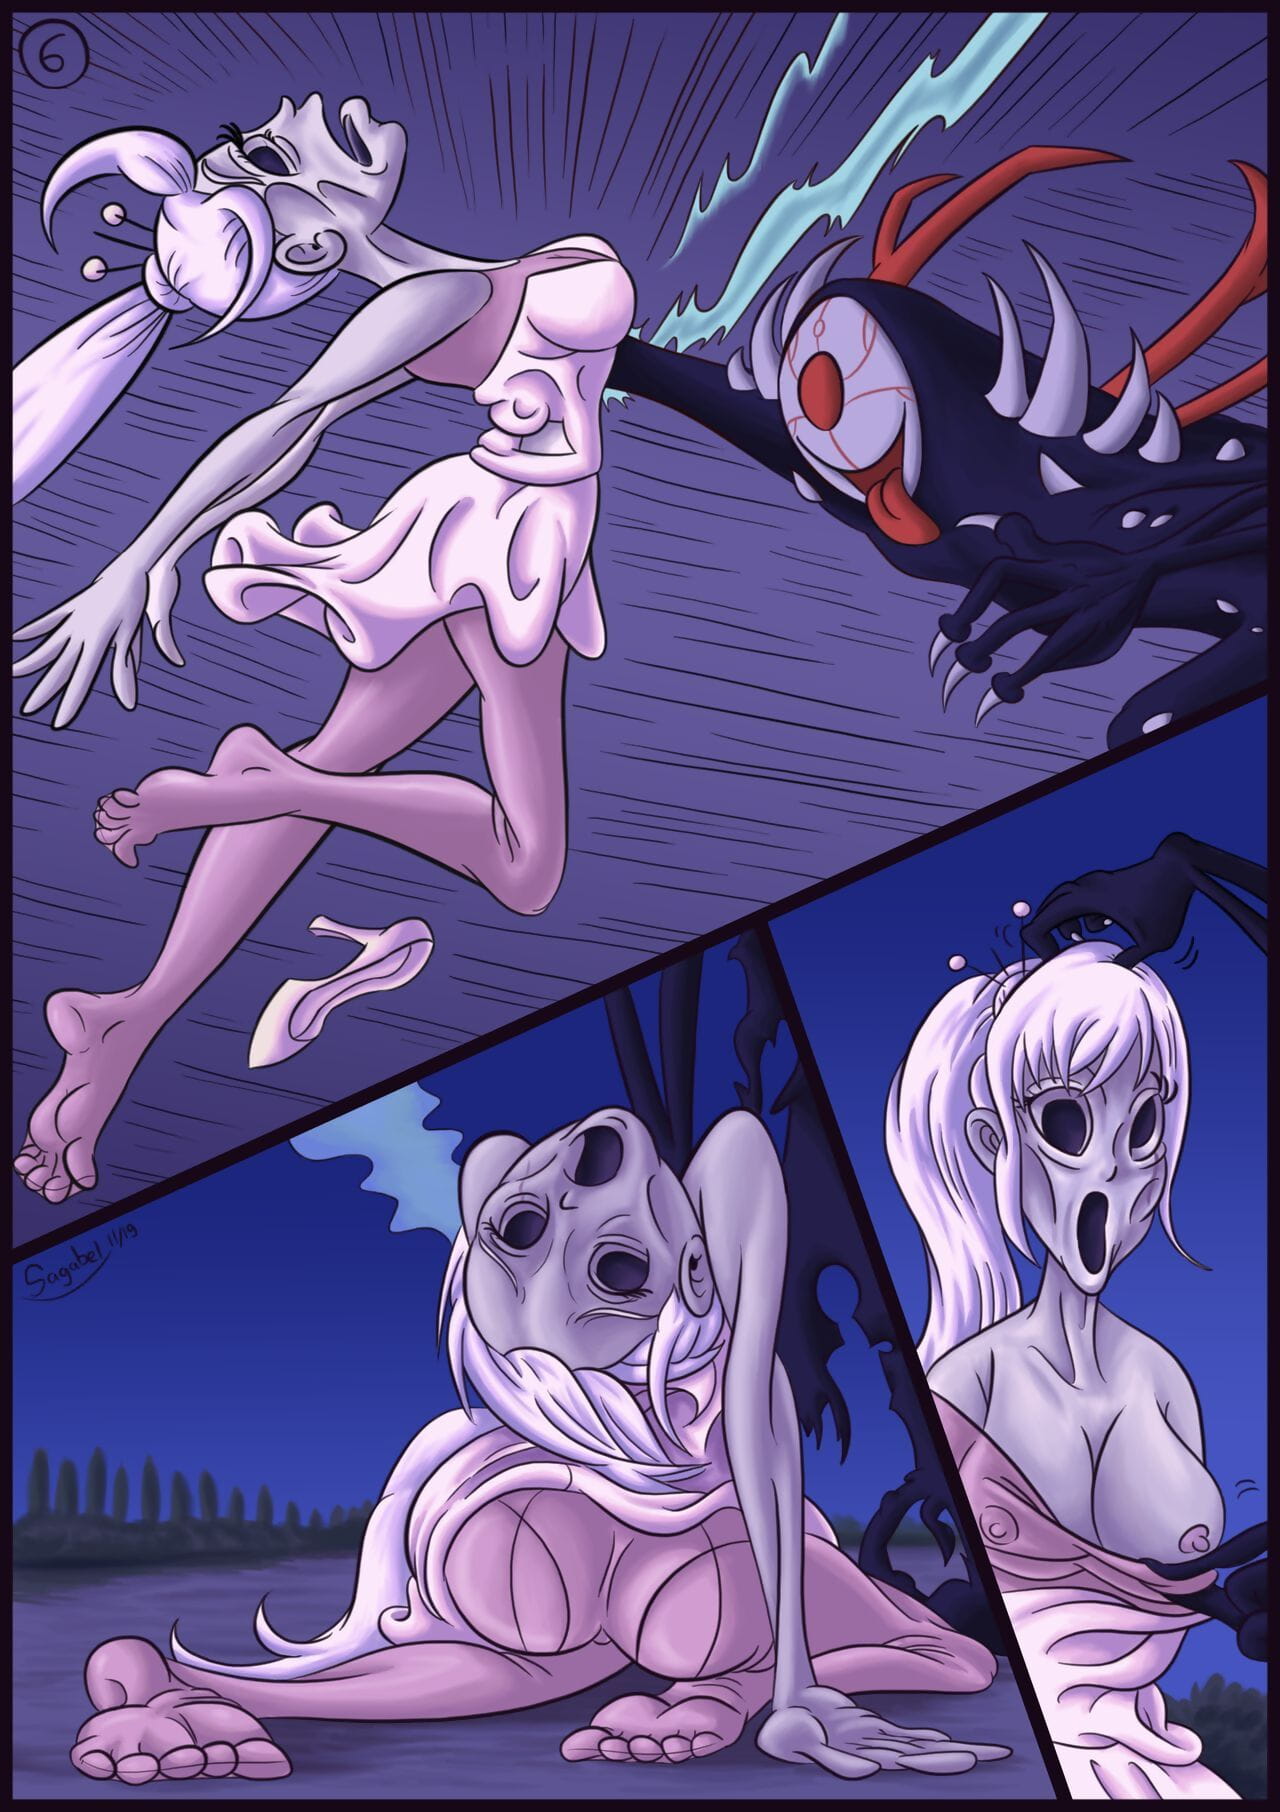 Sagabel- RWBY- Thisll Be The Night page 1